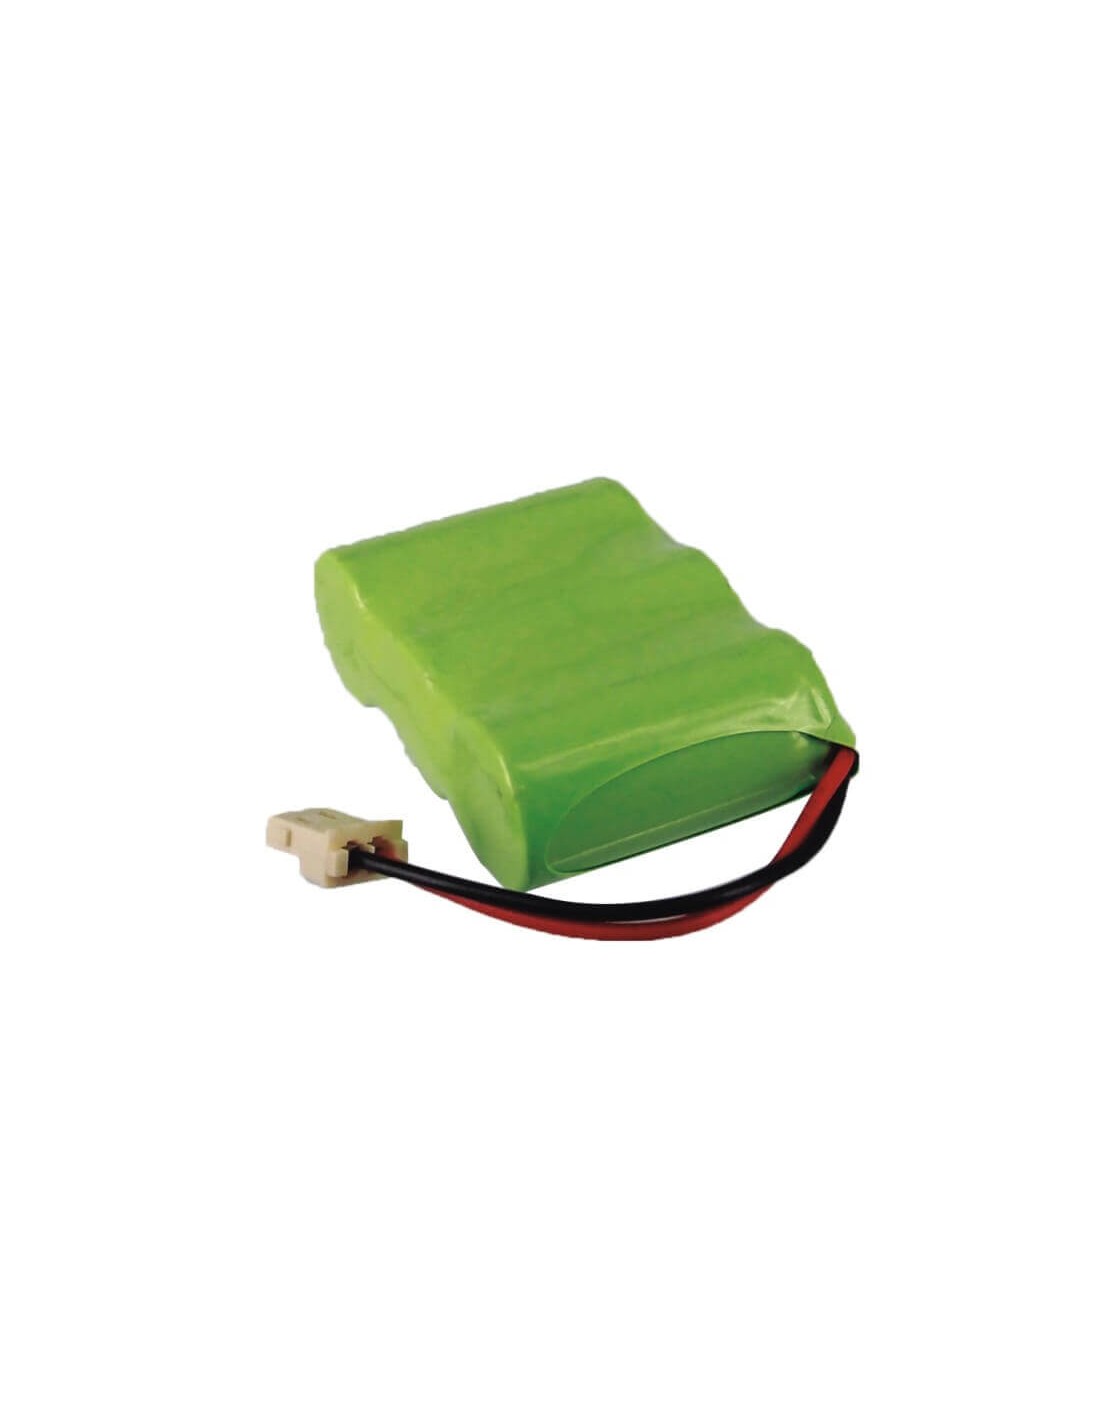 Battery for Code-a-phone, Cp2500, Cp2501, Cp2505, Cp2506, 3.6V, 600mAh - 2.16Wh